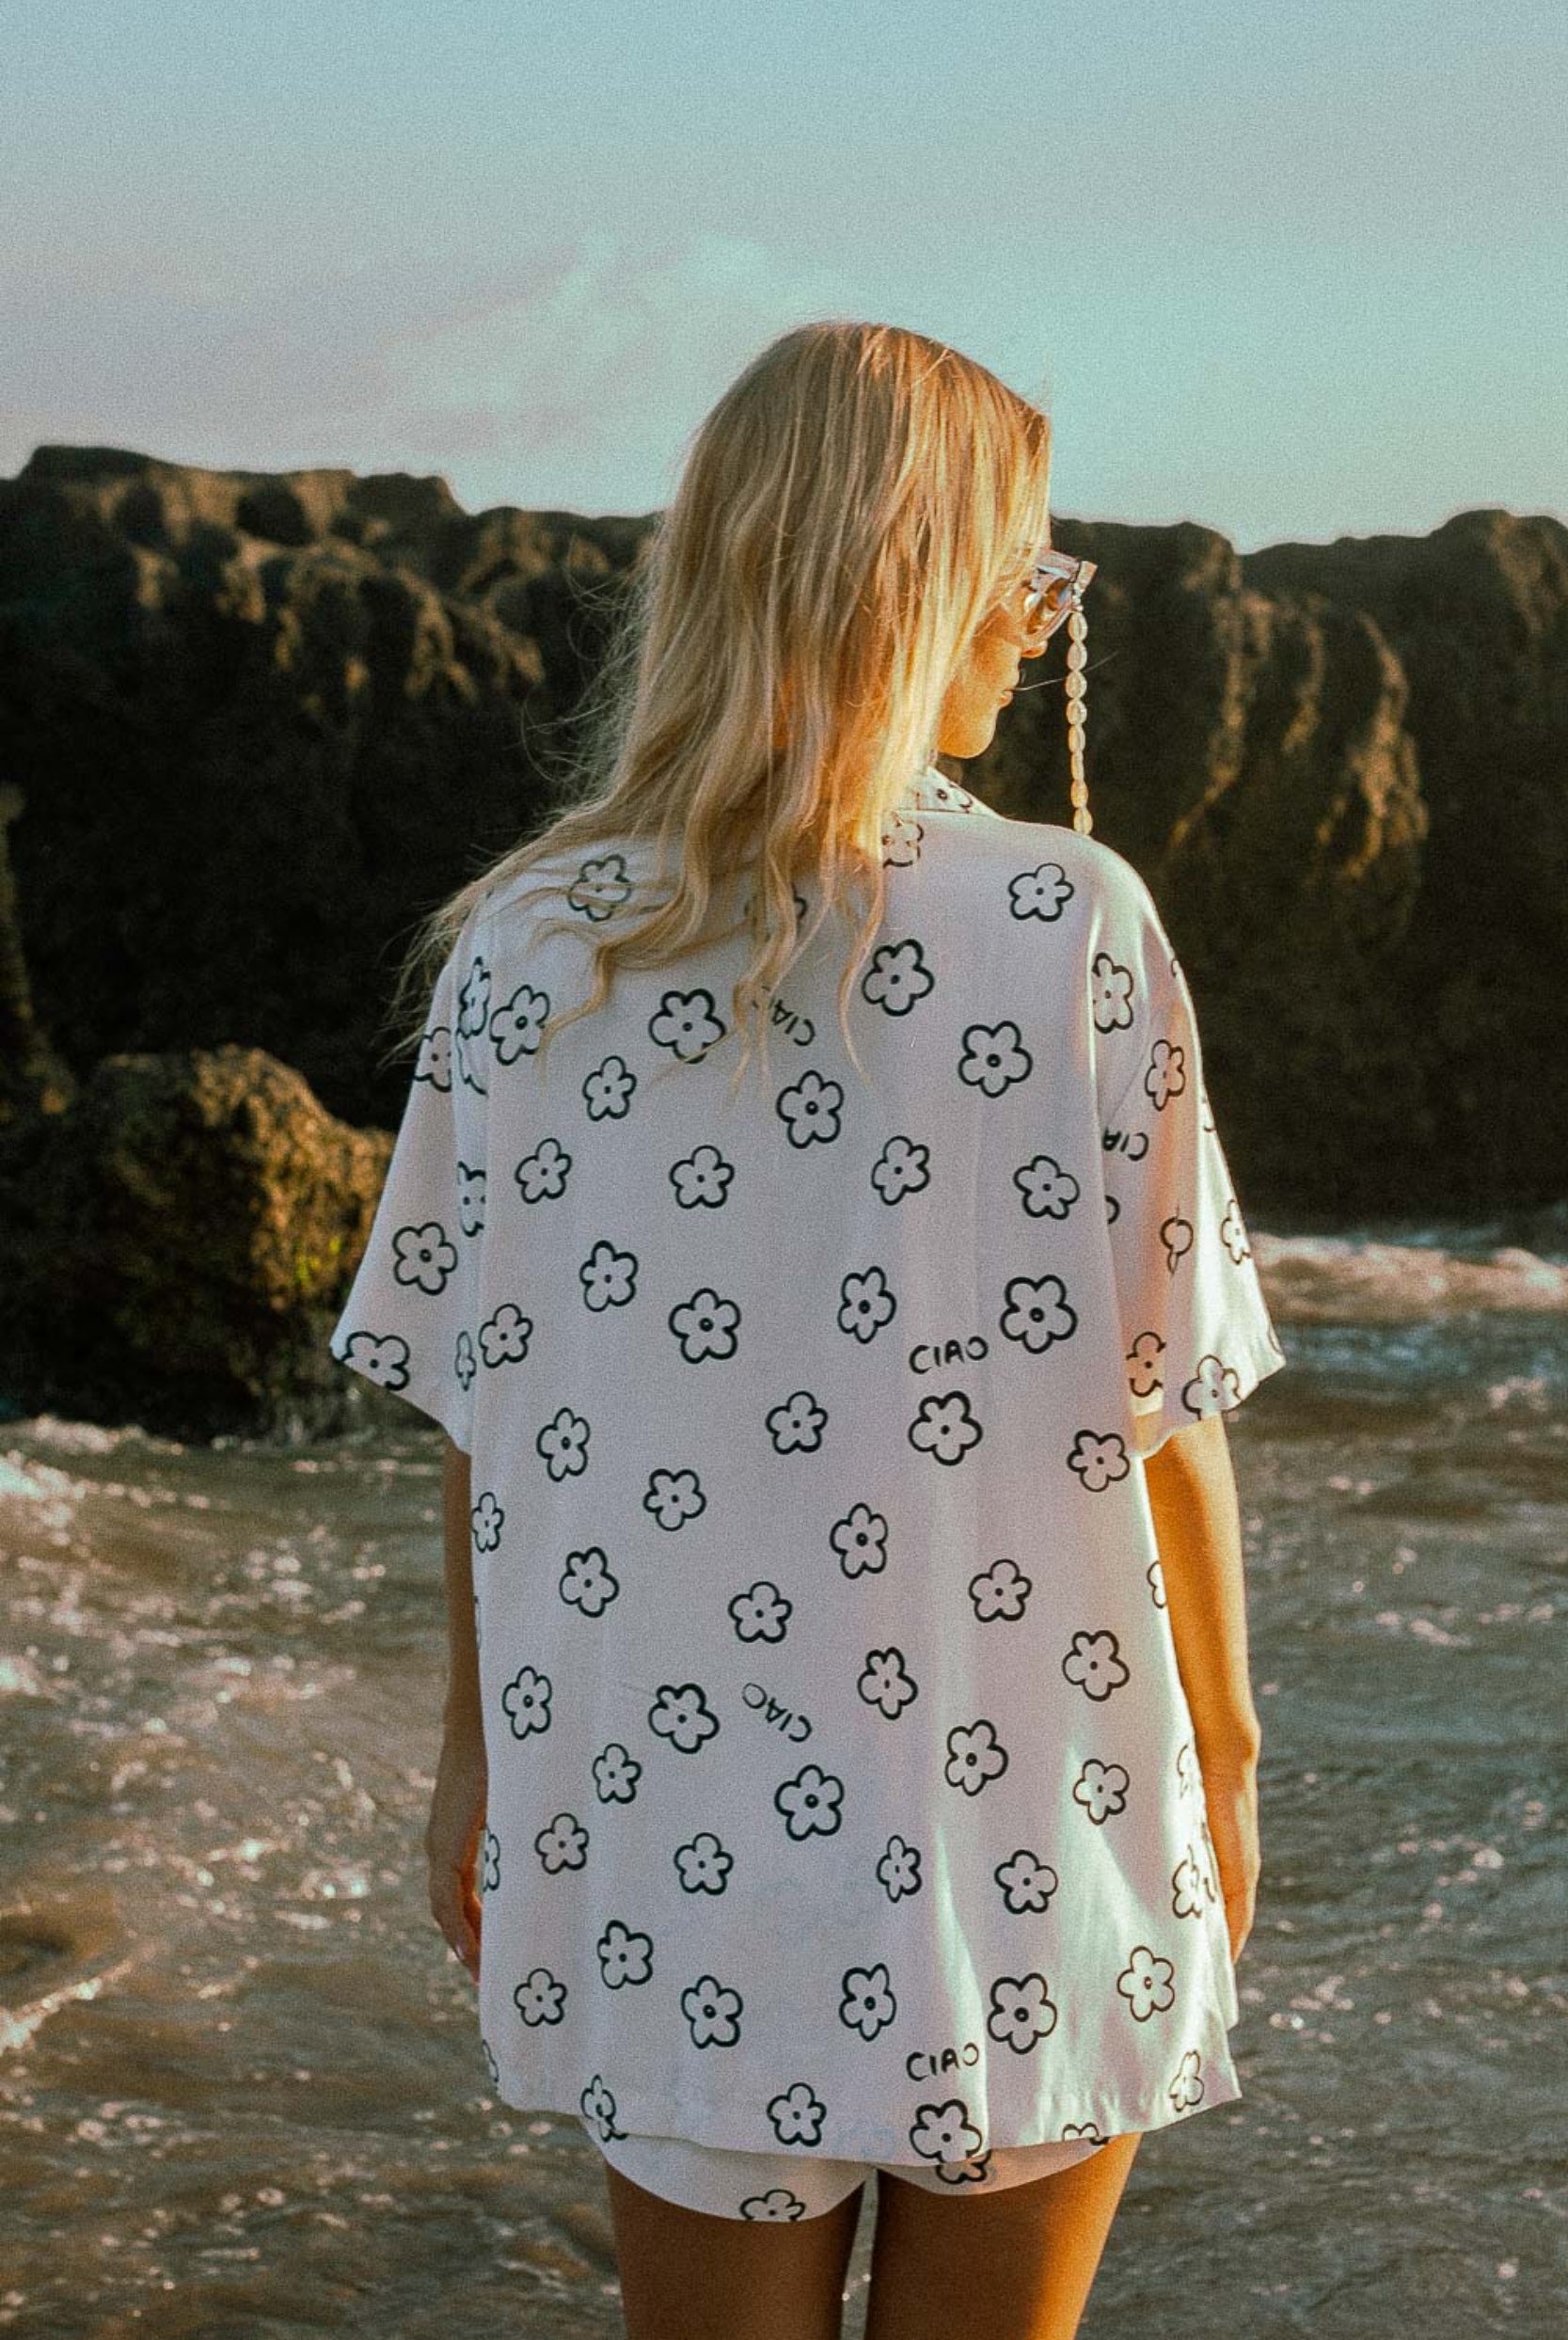 Ciao Bella Shirt with daisy print from Palm Collective